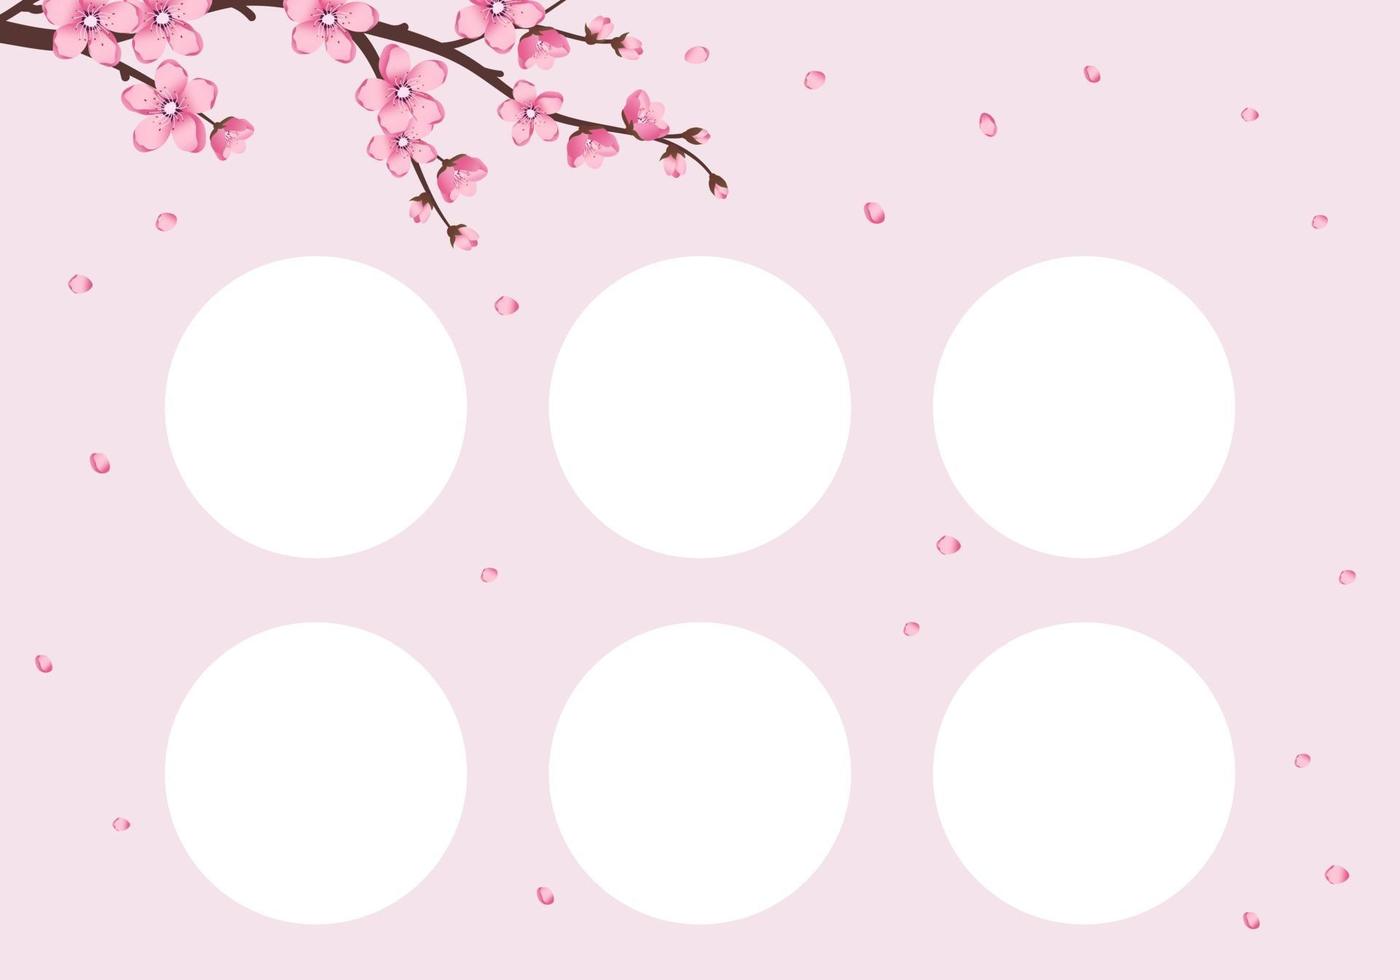 Discount card template with cherry blossom. Pink sakura flowers vector